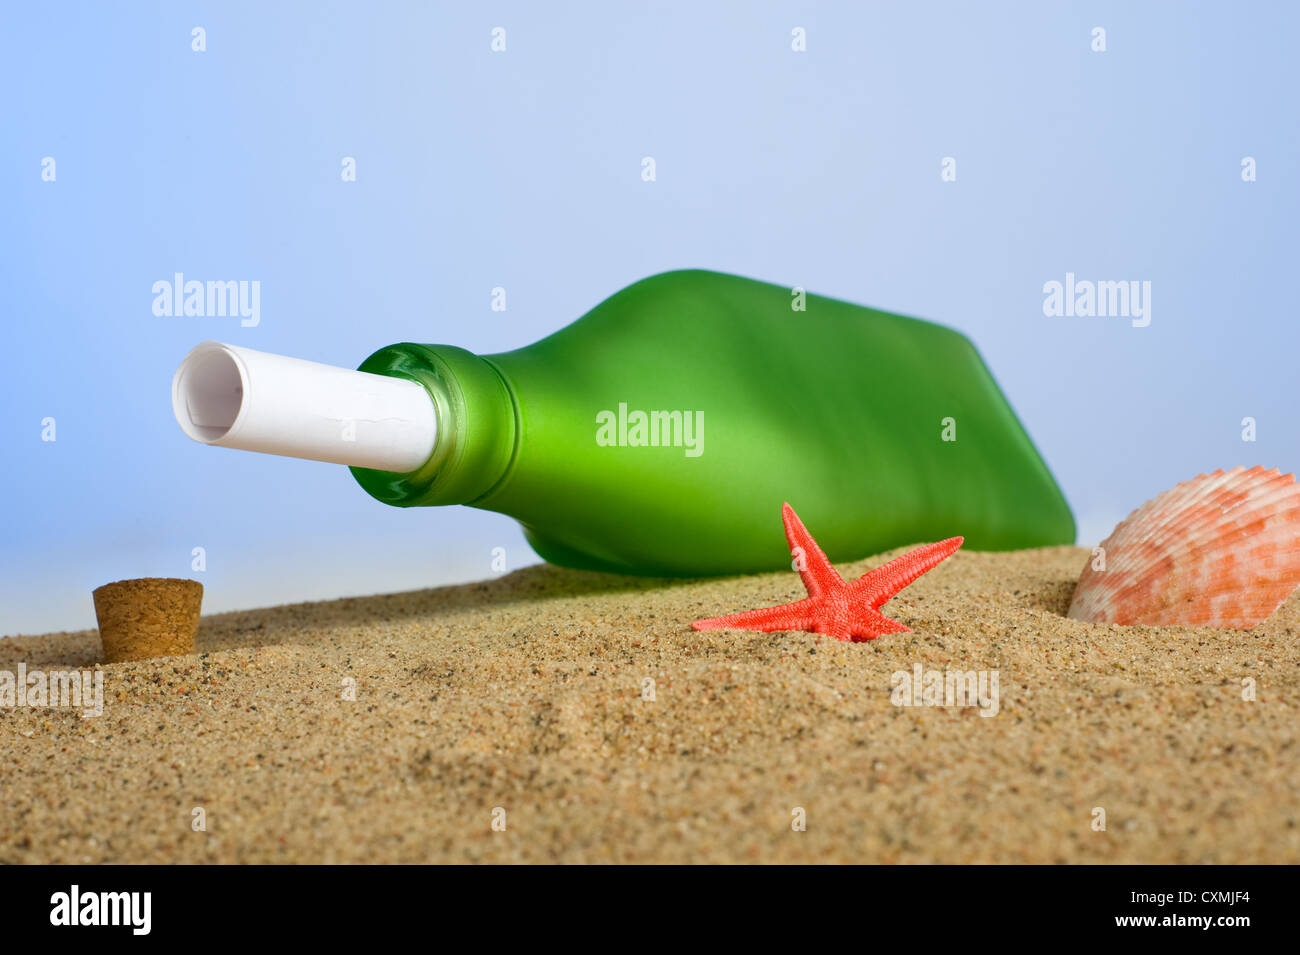 A rolled piece of paper in a green bottle on a sandy beach with sea shells etc, message in a bottle concept Stock Photo